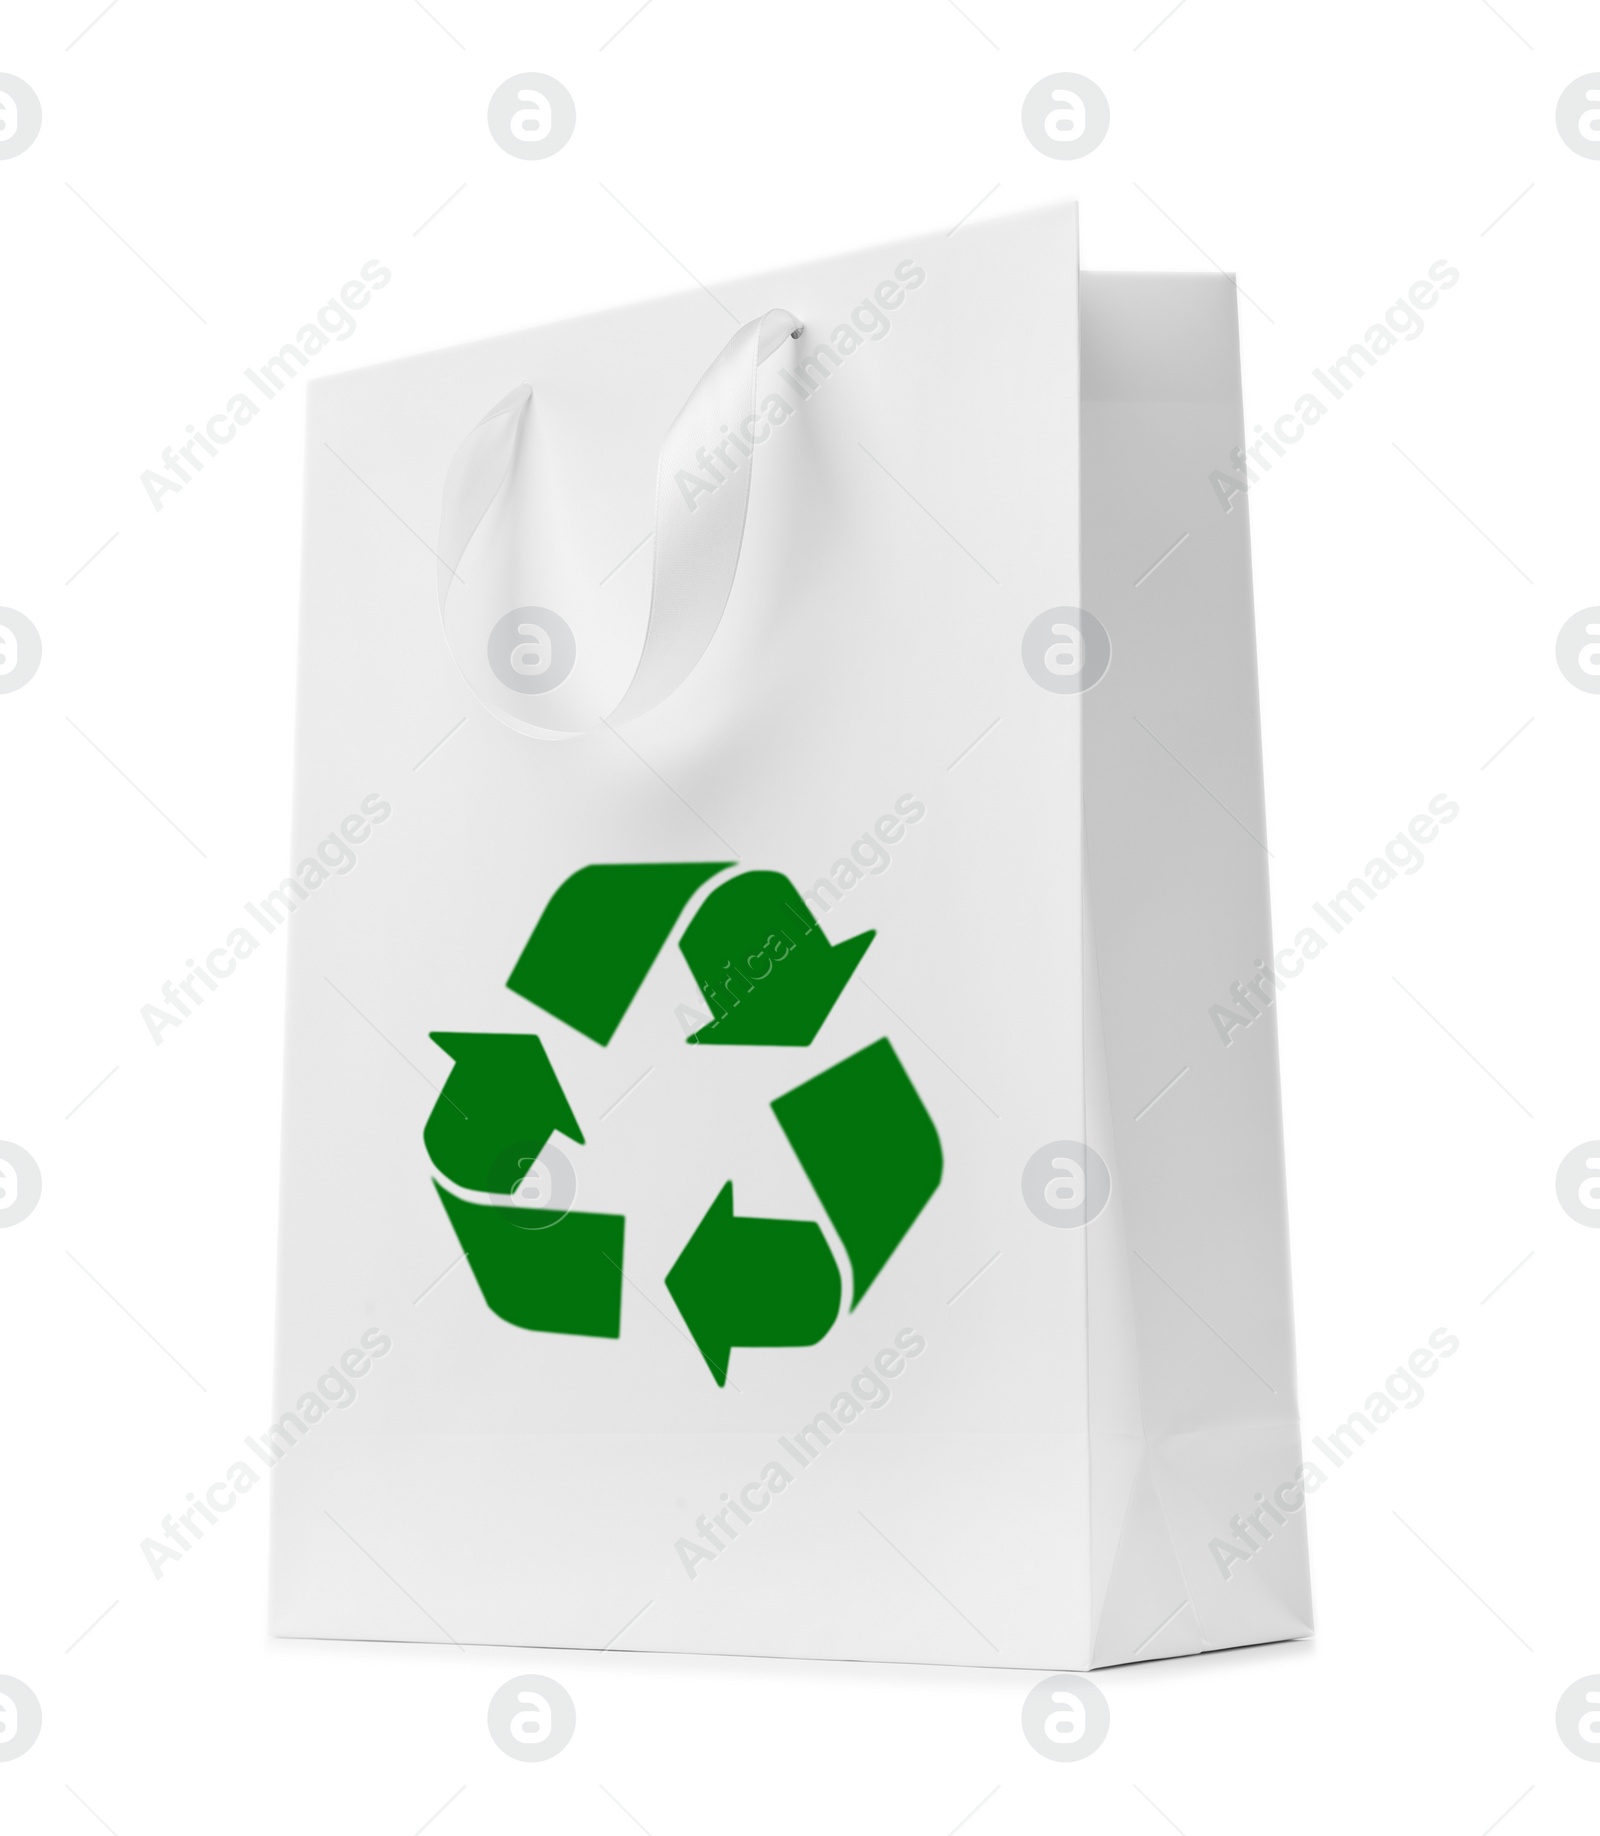 Image of Paper shopping bag with recycling symbol on white background 